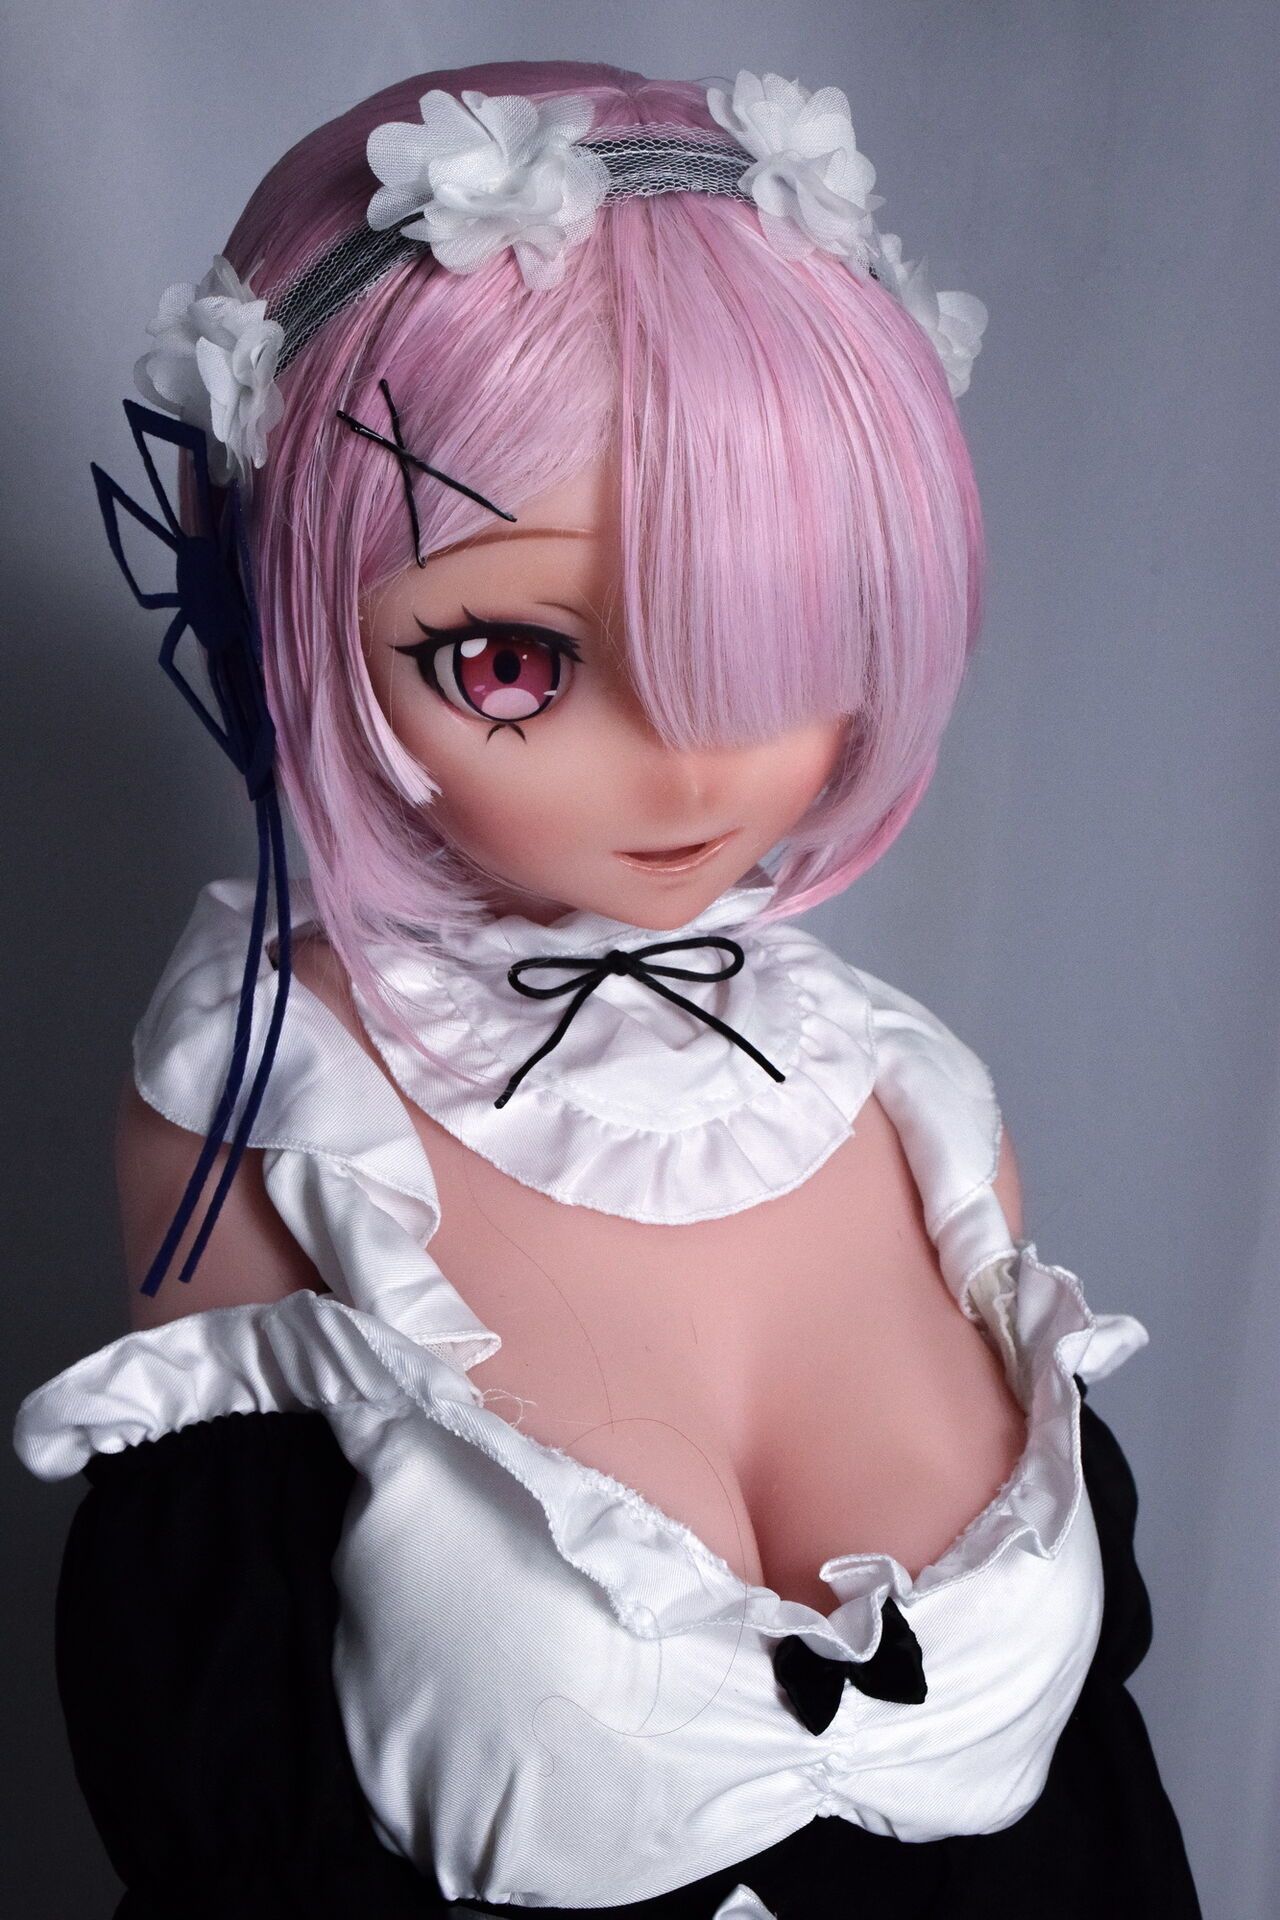 Elsa Babe [148CM AHR006 Mishima Miyo] 12% off the first launch of new doll! 2022.06.14 11